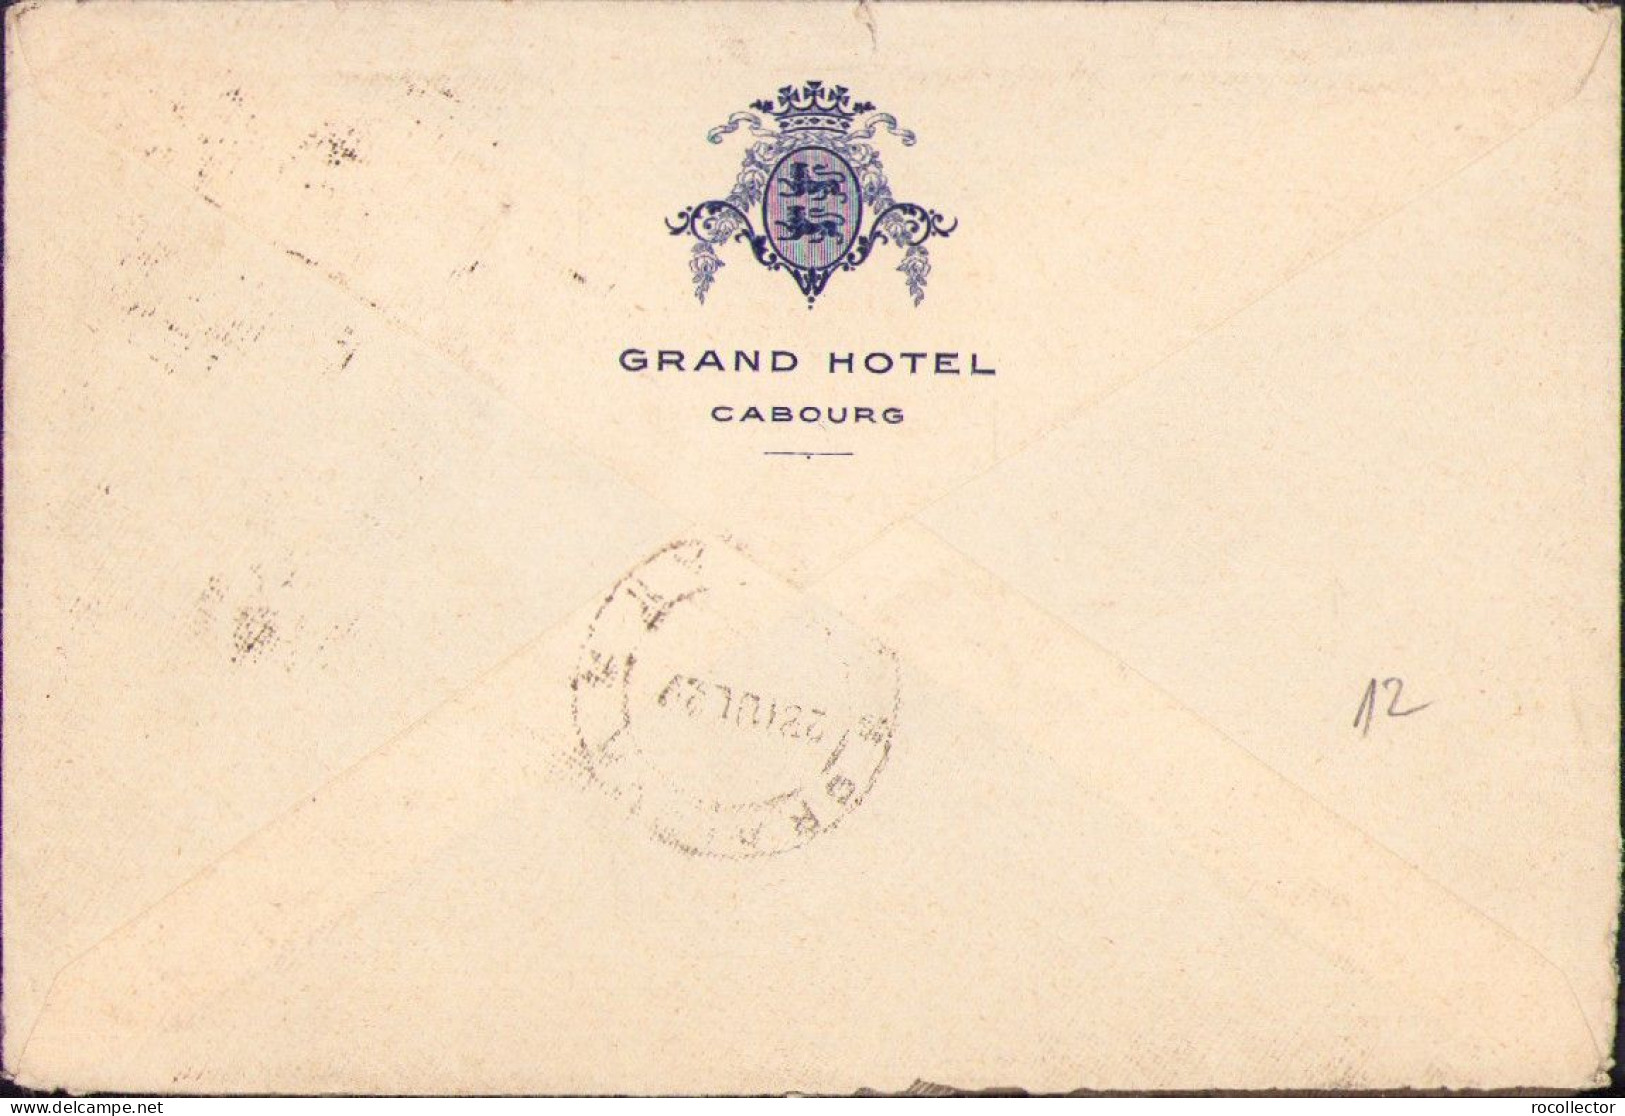 Grand Hotel Cabourg En-tête Letter And Paper, 1927, With 4 Stamps Of 40 Centimes, Circulated Calvados-Craiova A2497N - Collections